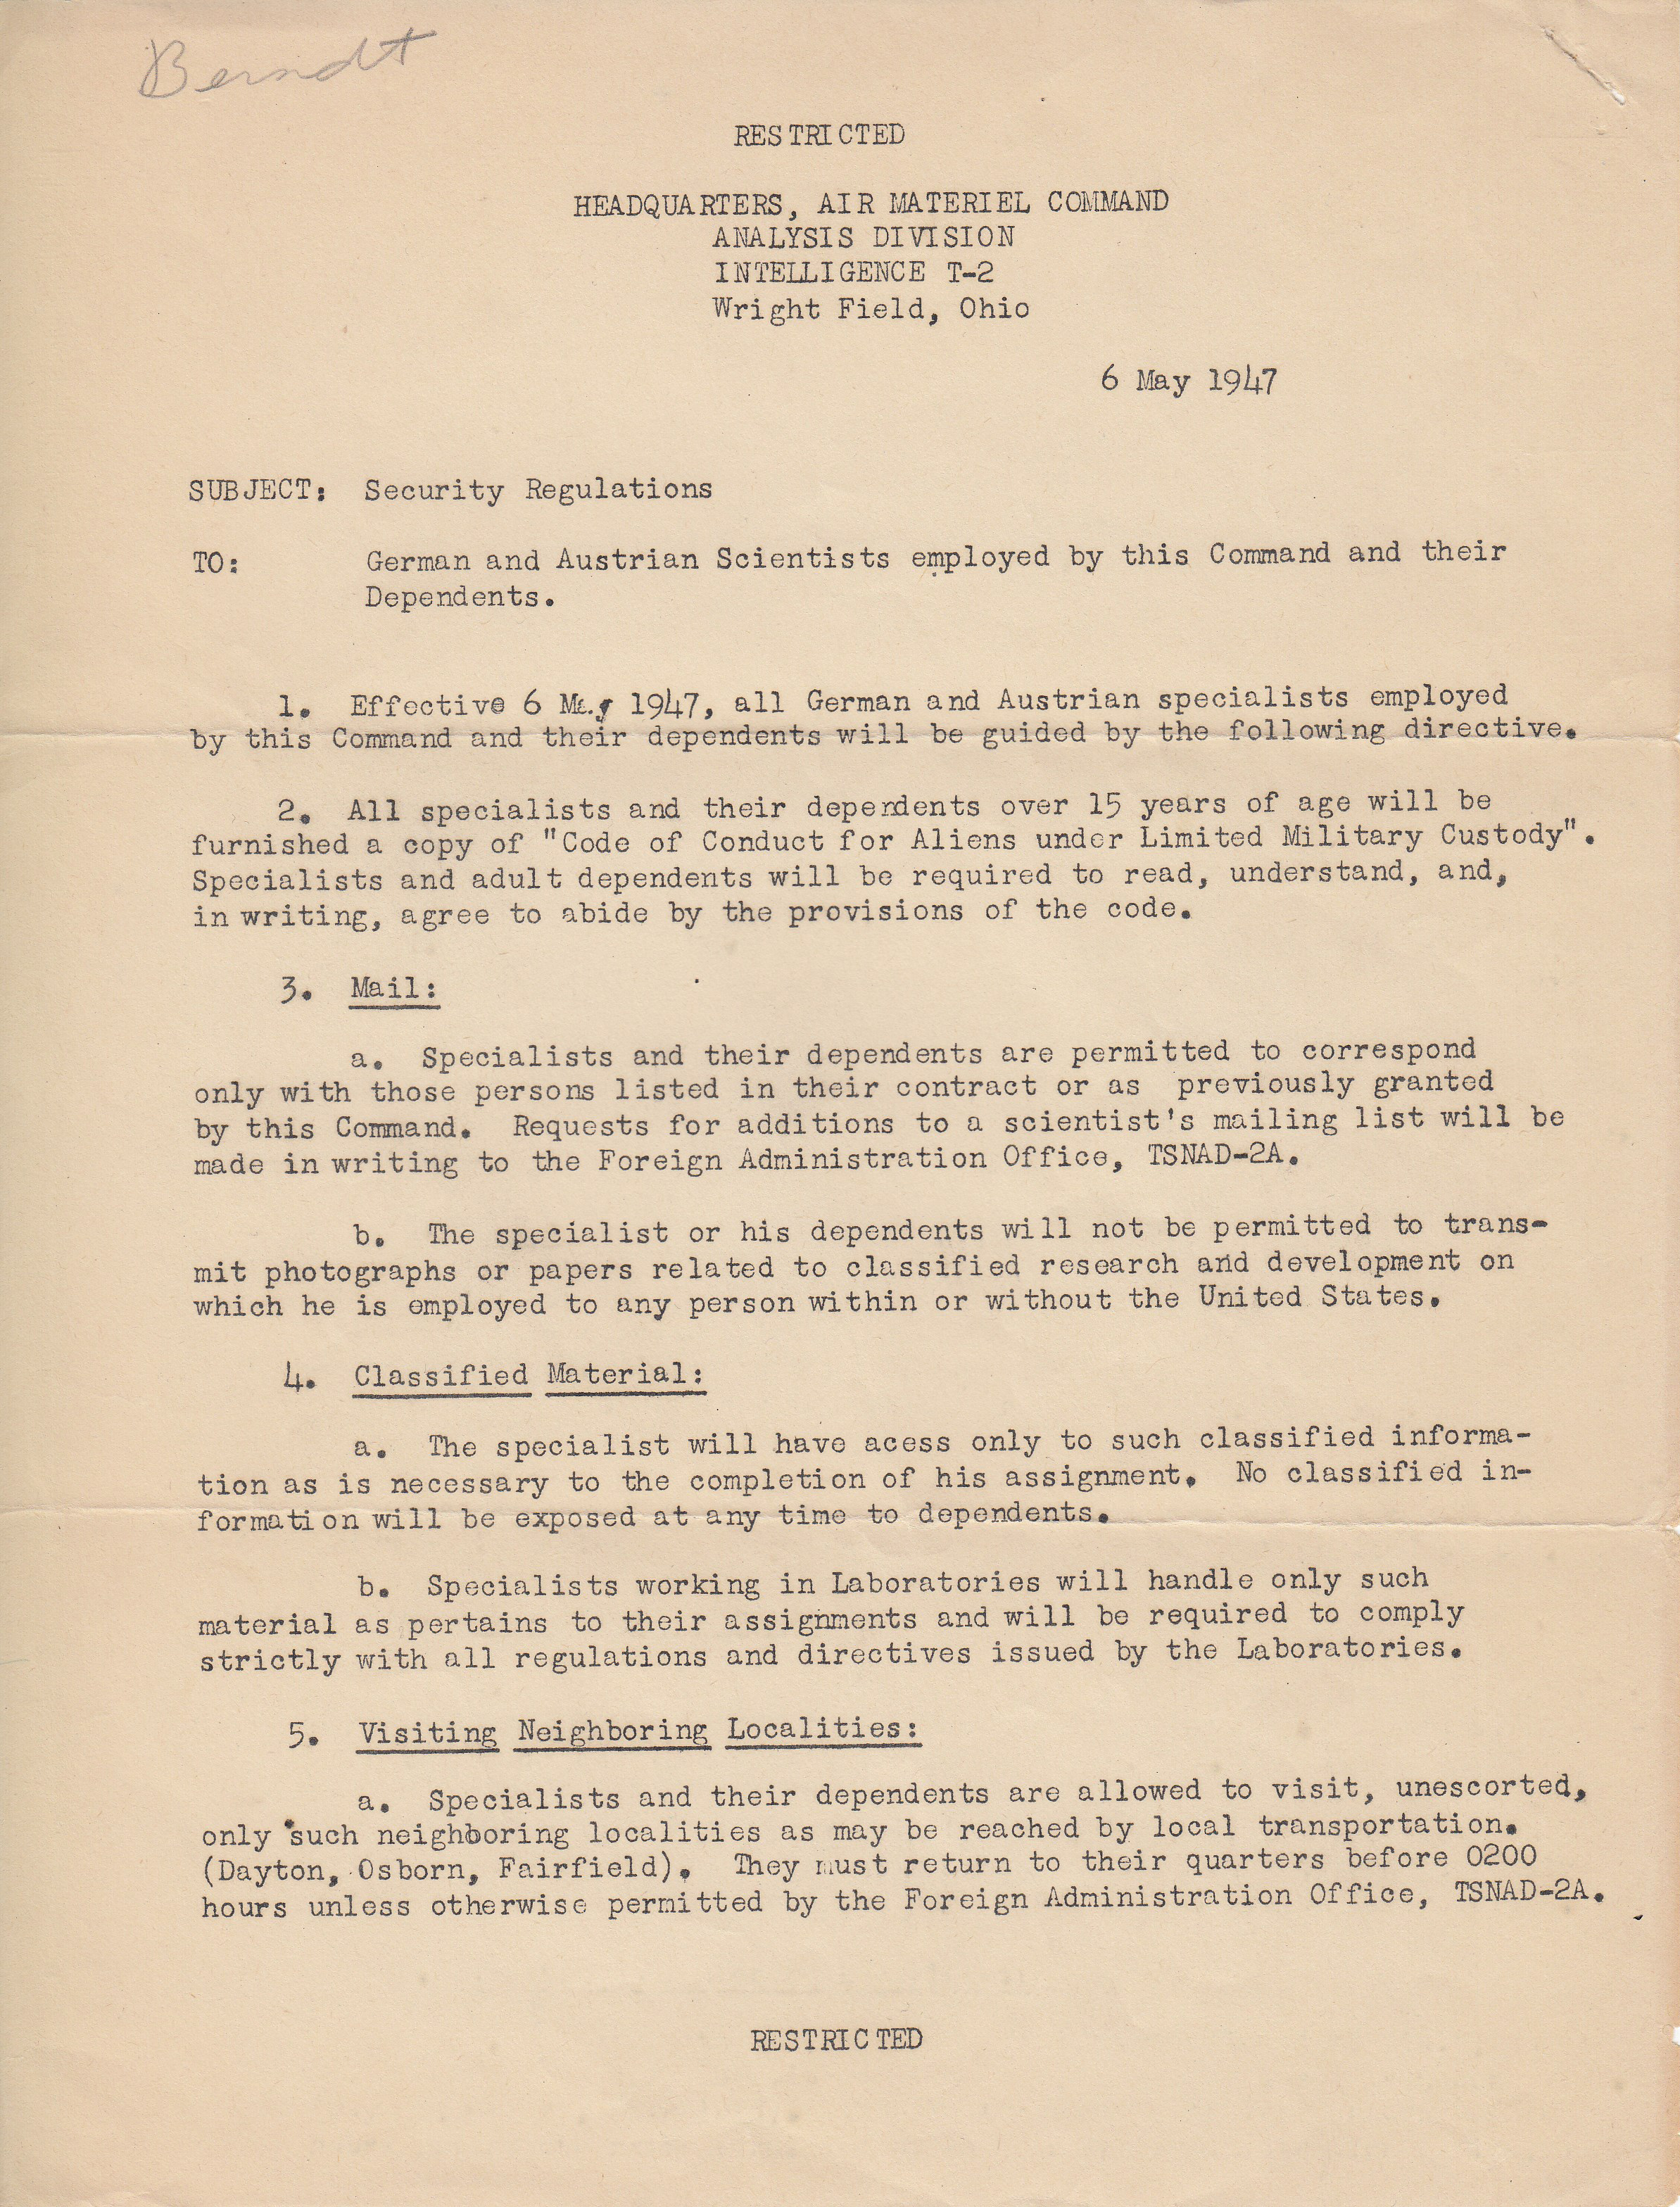 One of several memoranda to German and Austrian scientists at Wright Field, 1947 (Box 1, File 34)